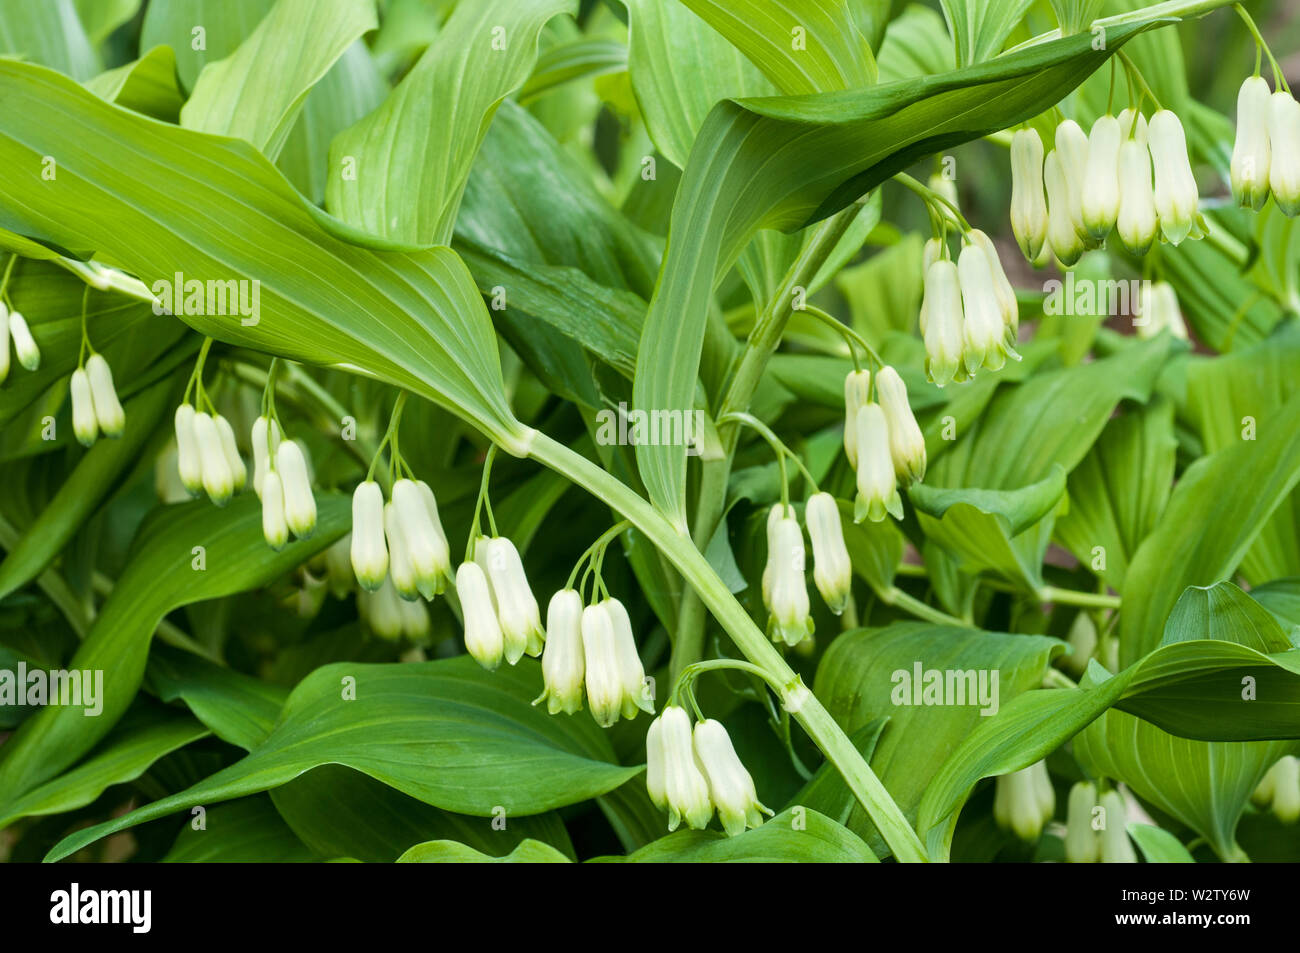 TÌNH YÊU CÂY CỎ ĐV 5 - Page 28 Polygonatum-hirtum-solomons-seal-showing-groups-of-white-flowers-with-green-tips-fully-hardy-and-best-grown-in-full-or-partial-shade-W2TY6W